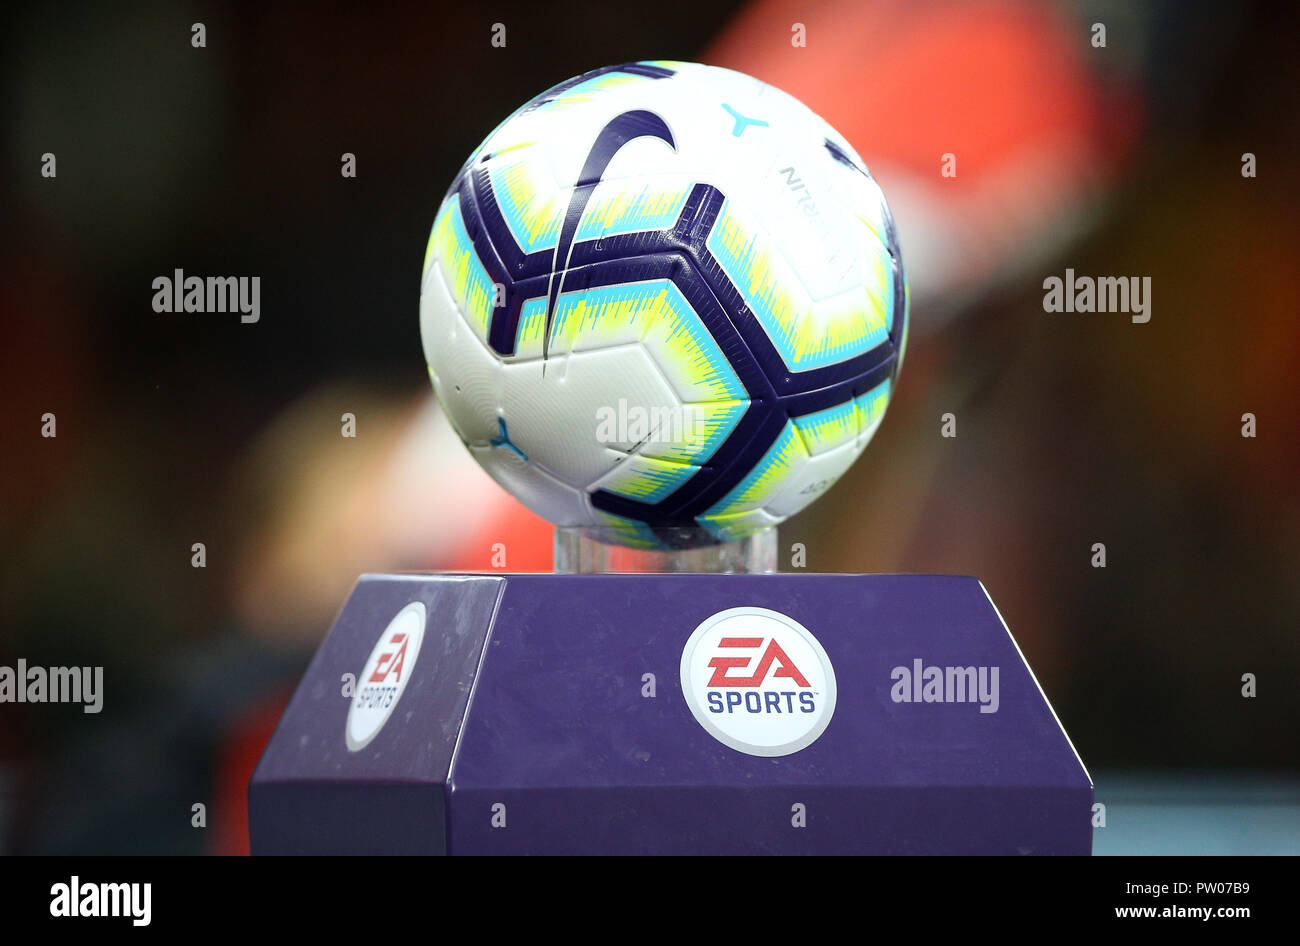 Aclarar hueco Instituto A general view of the Nike Merlin match ball on display before the Premier  League match at the Vitality Stadium, Bournemouth Stock Photo - Alamy